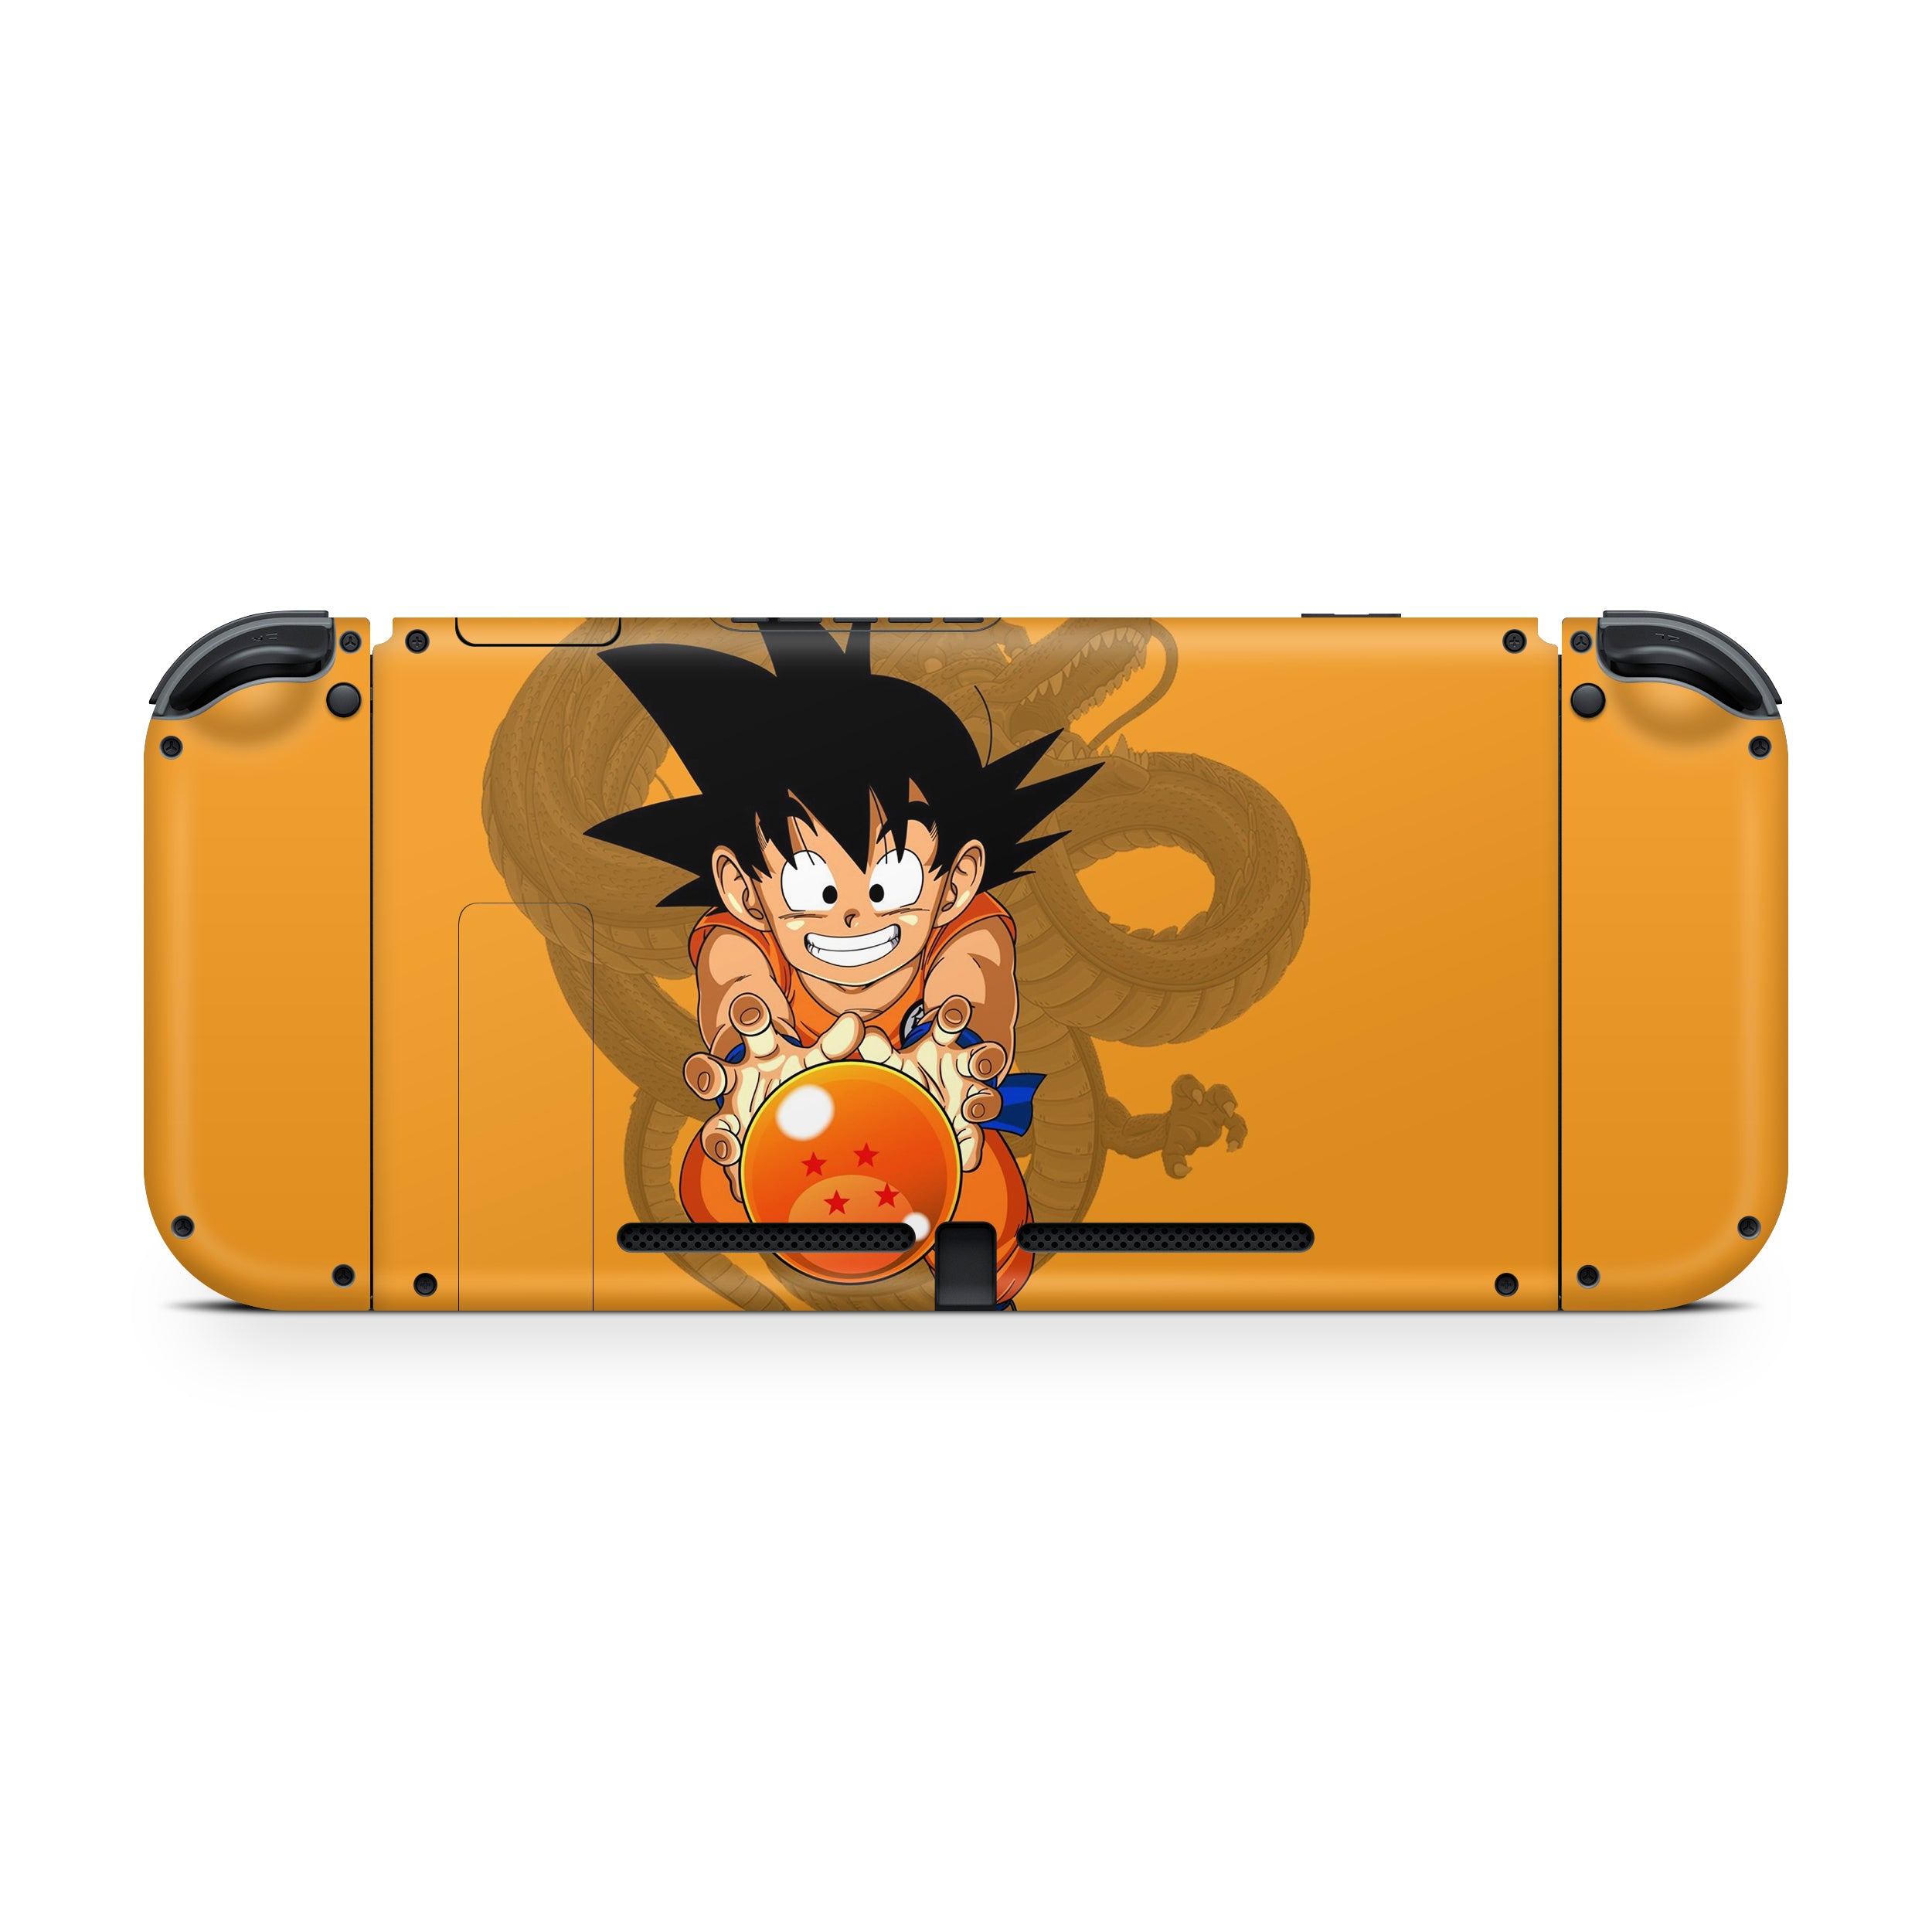 A video game skin featuring a Dragon Ball Z Goku design for the Nintendo Switch.